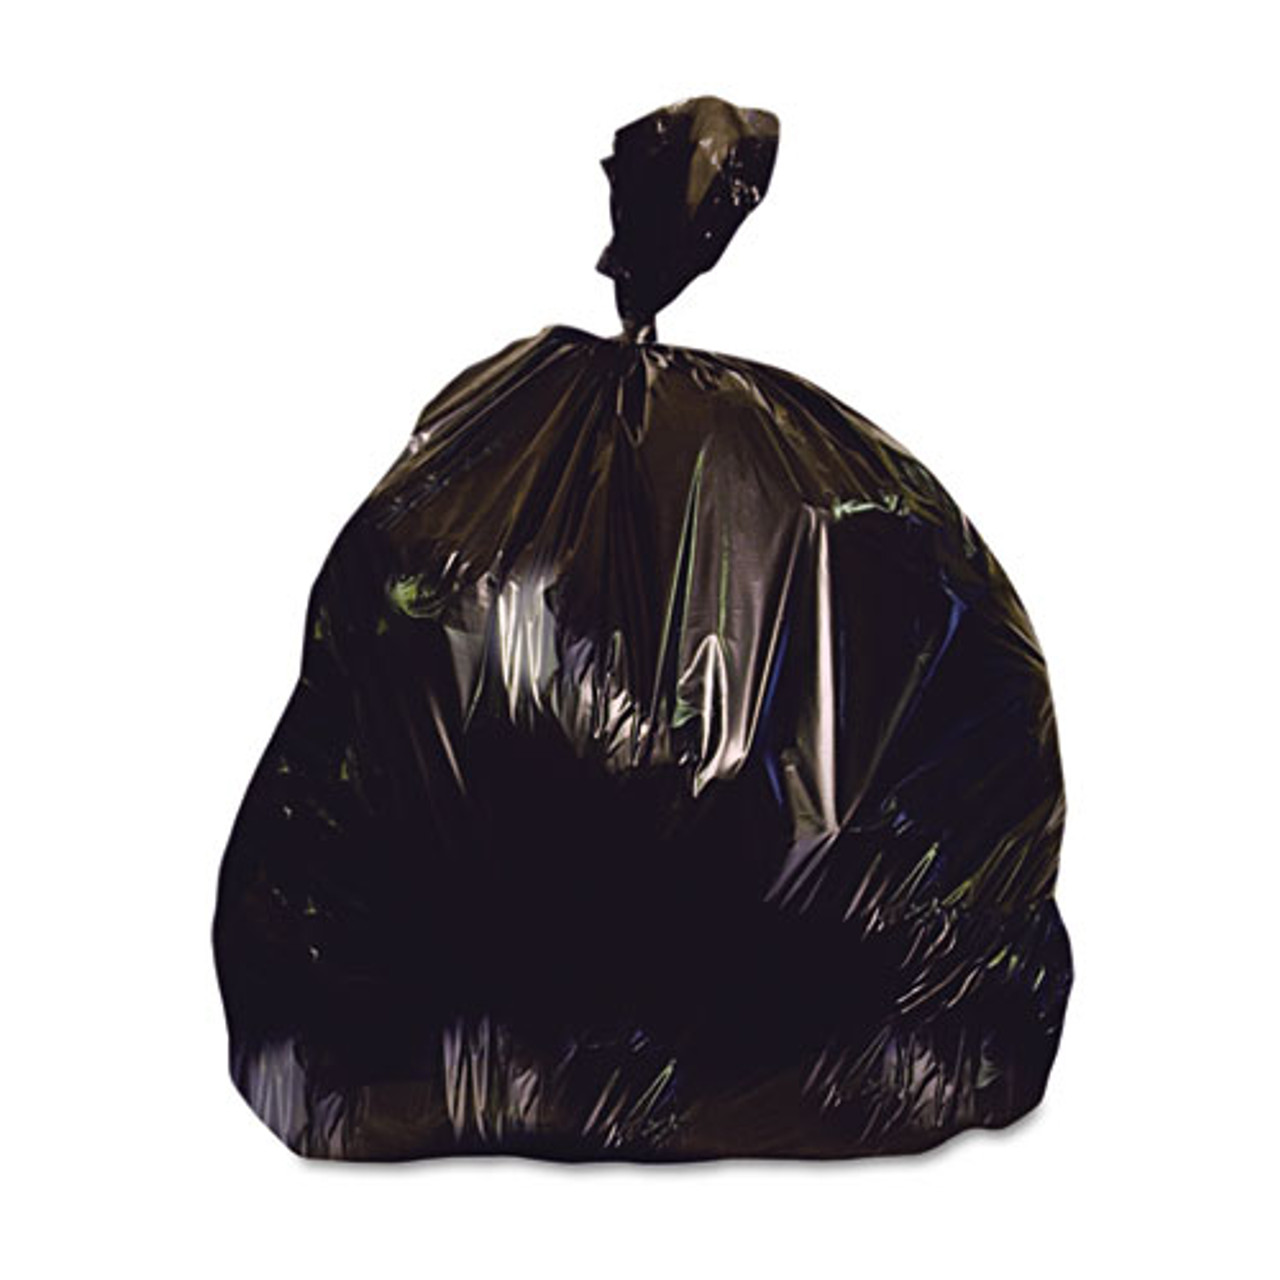 Commercial trash bags 45 gallon 40x46 .6 mil case of 100